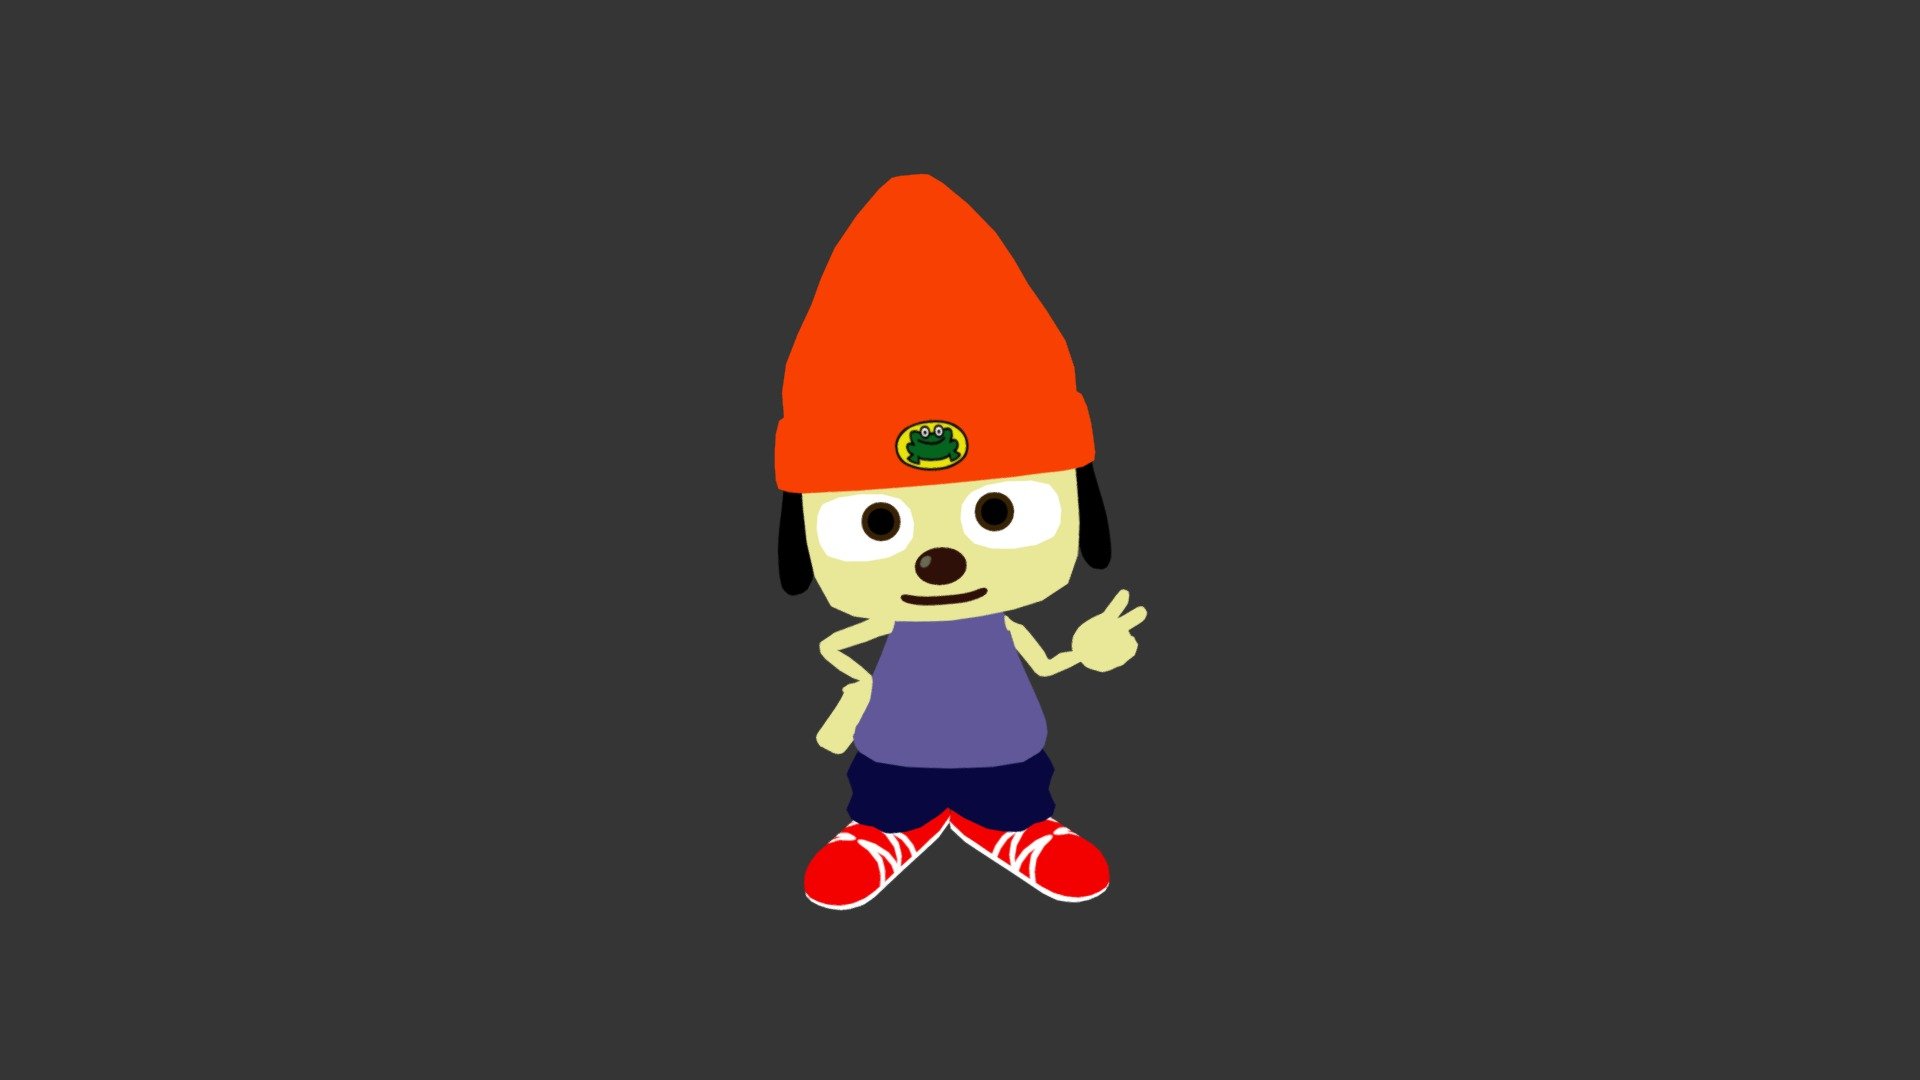 PaRappa the Rapper - SteamGridDB